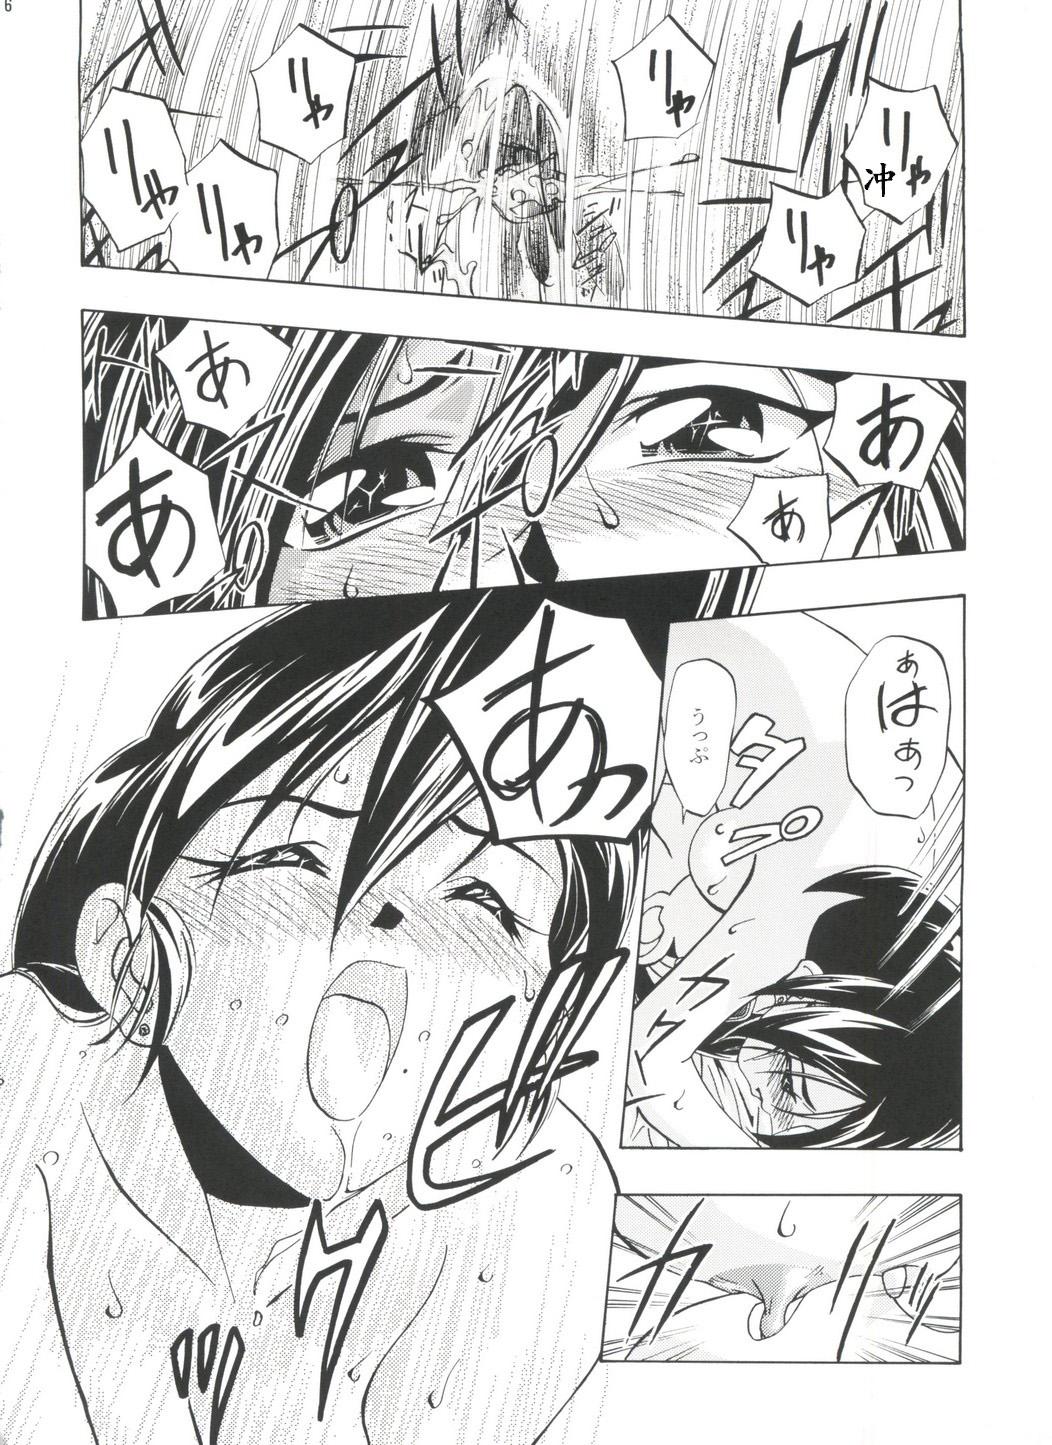 Assfucked Taiketsu! Go VS Fighter! - Bakusou kyoudai lets and go Female - Page 10